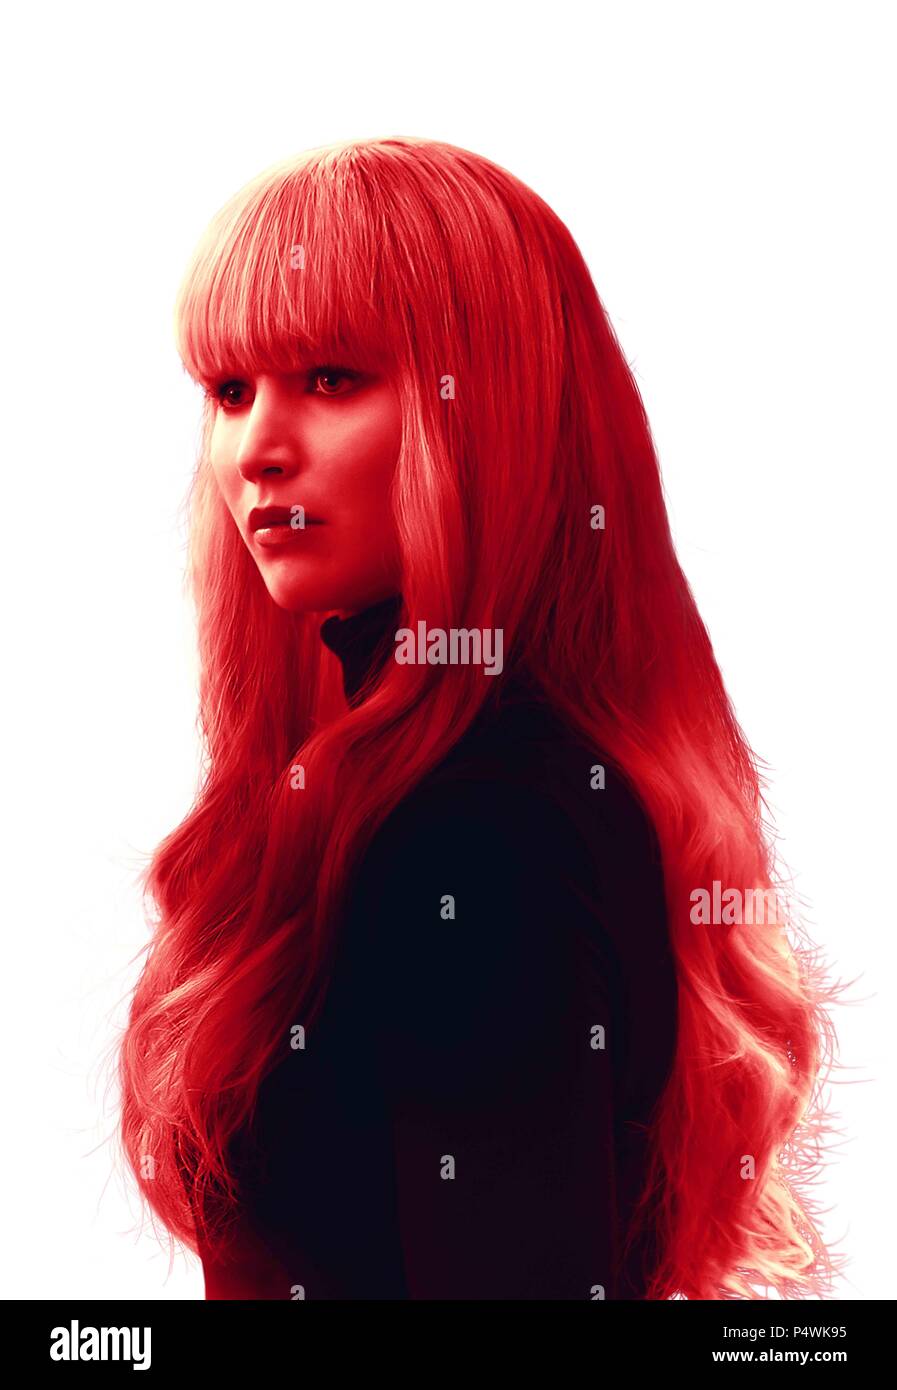 Original Film Title: RED SPARROW.  English Title: RED SPARROW.  Film Director: FRANCIS LAWRENCE.  Year: 2018.  Stars: JENNIFER LAWRENCE. Credit: CHERNIN ENTERTAINMENT / Album Stock Photo